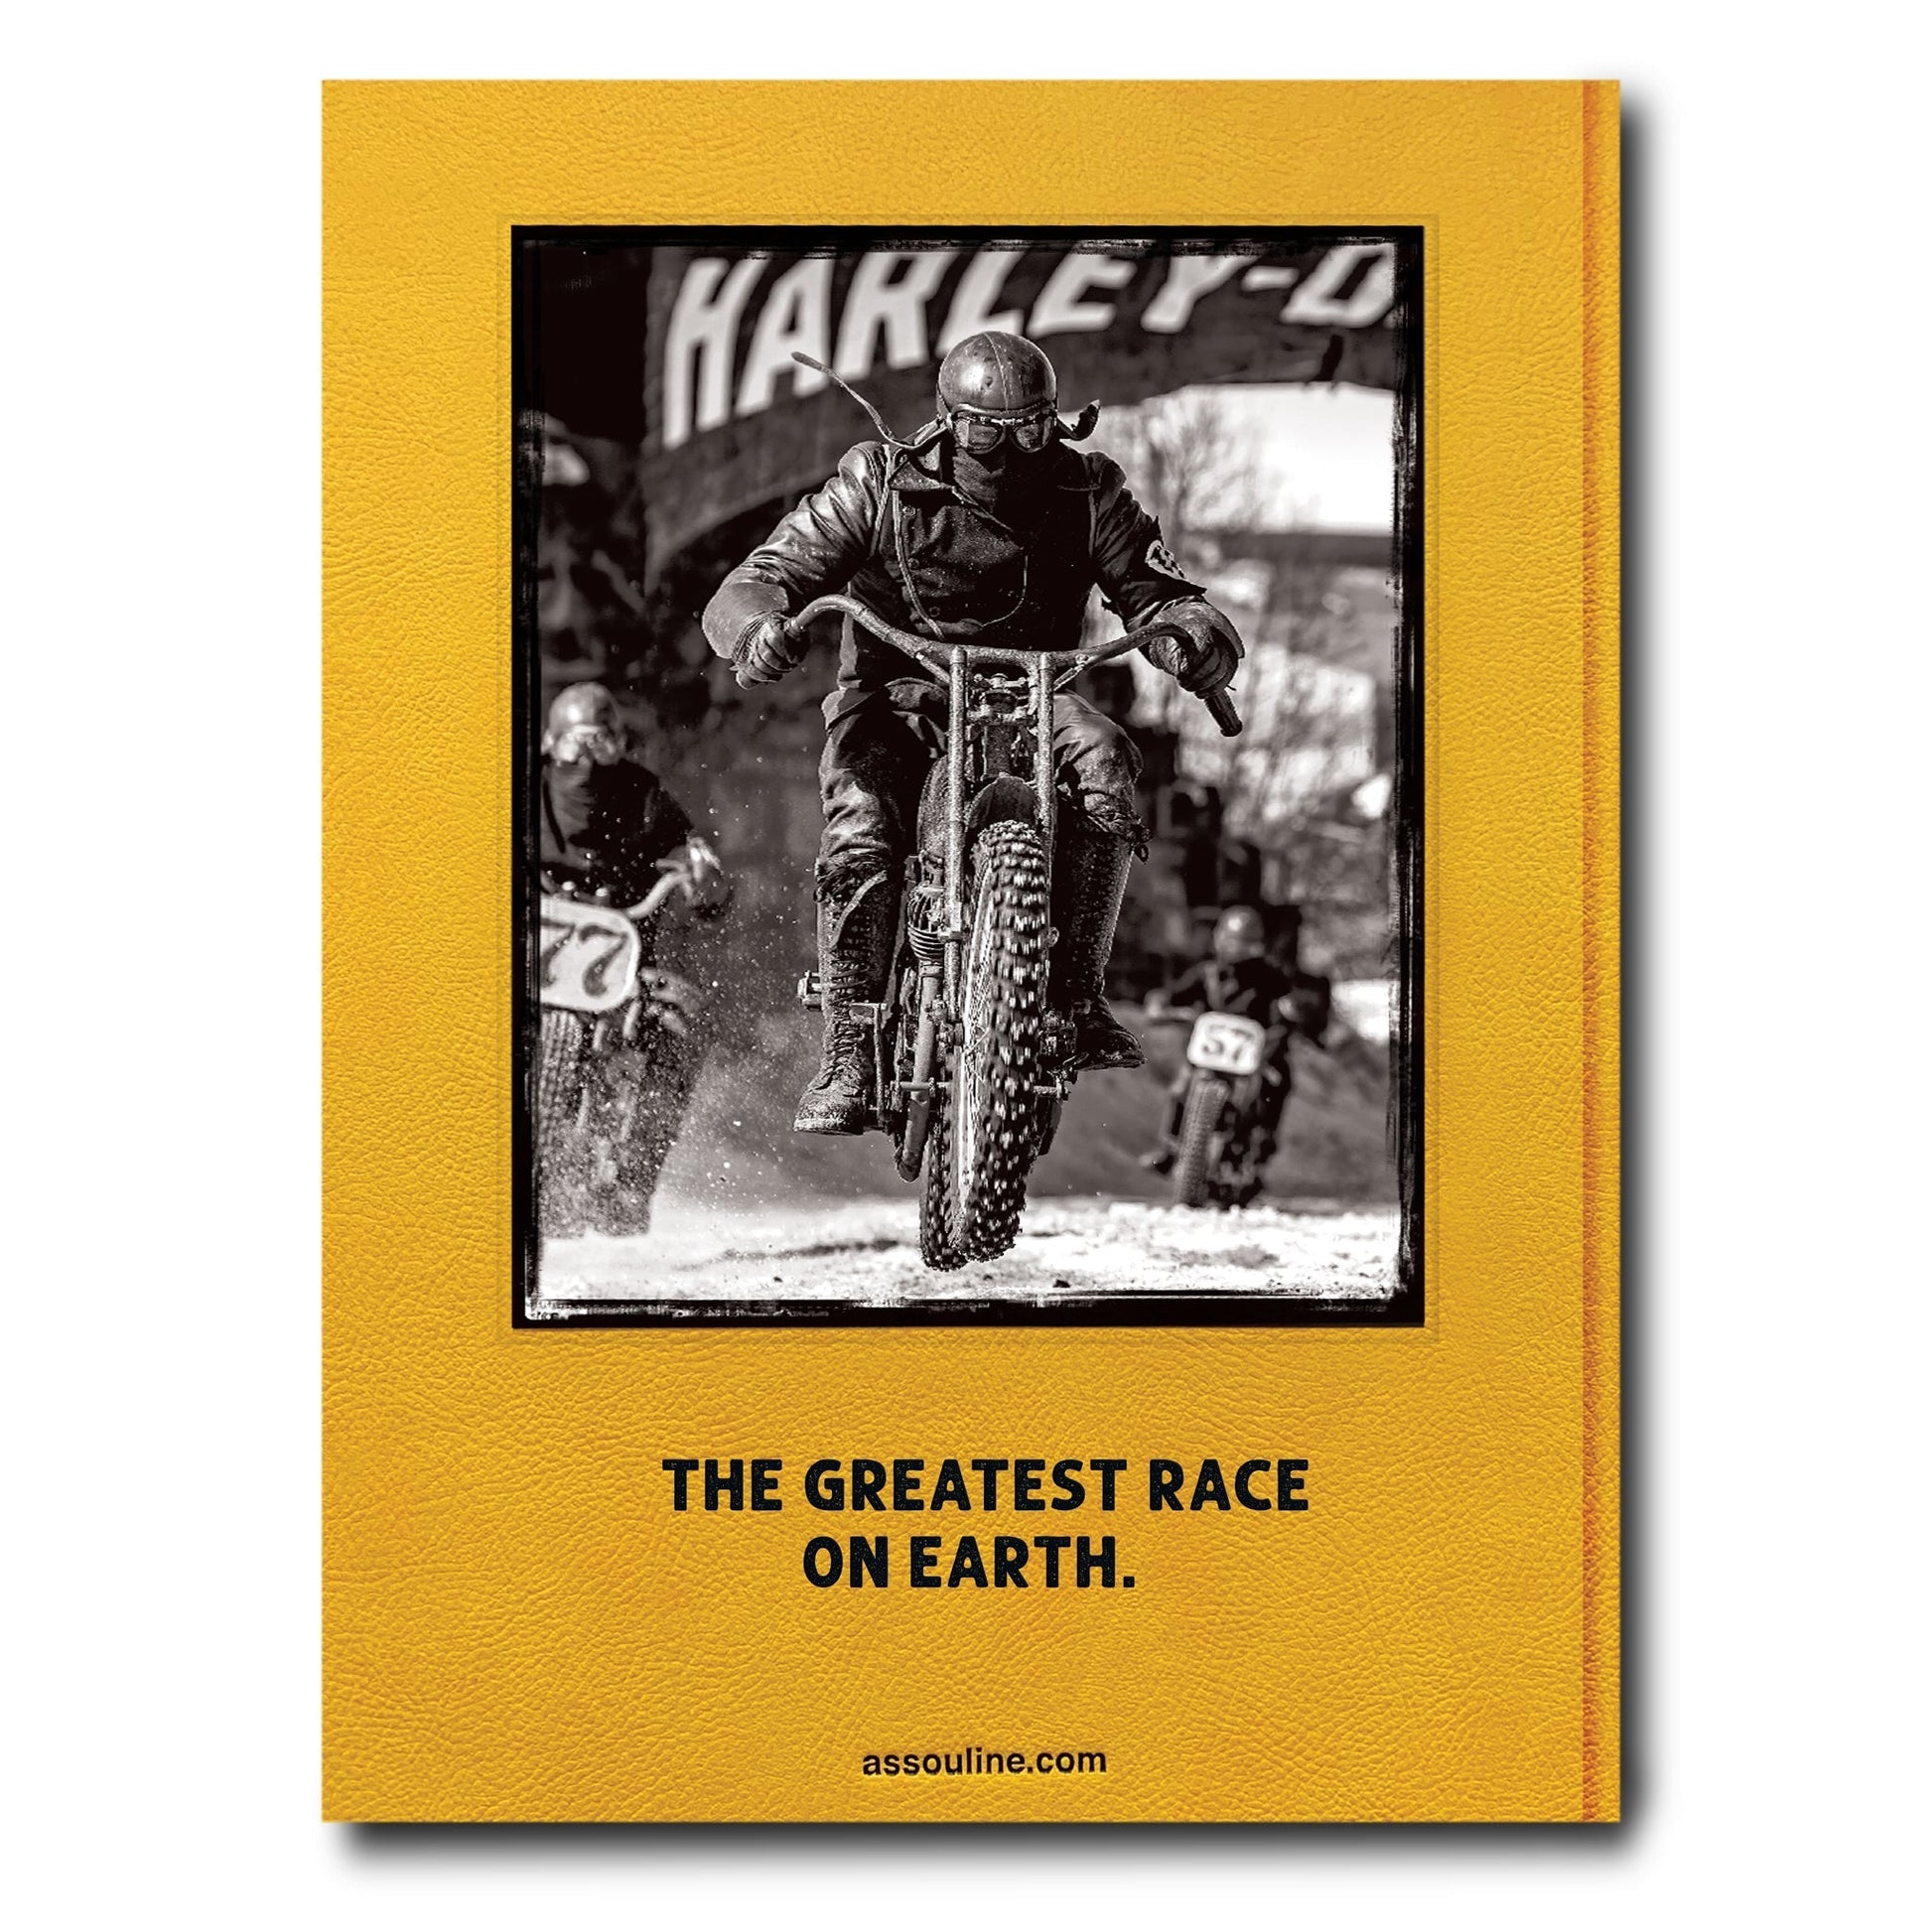 A motorcyclist mid-jump in the Assouline Race of Gentlemen, with the caption "the greatest race on earth".